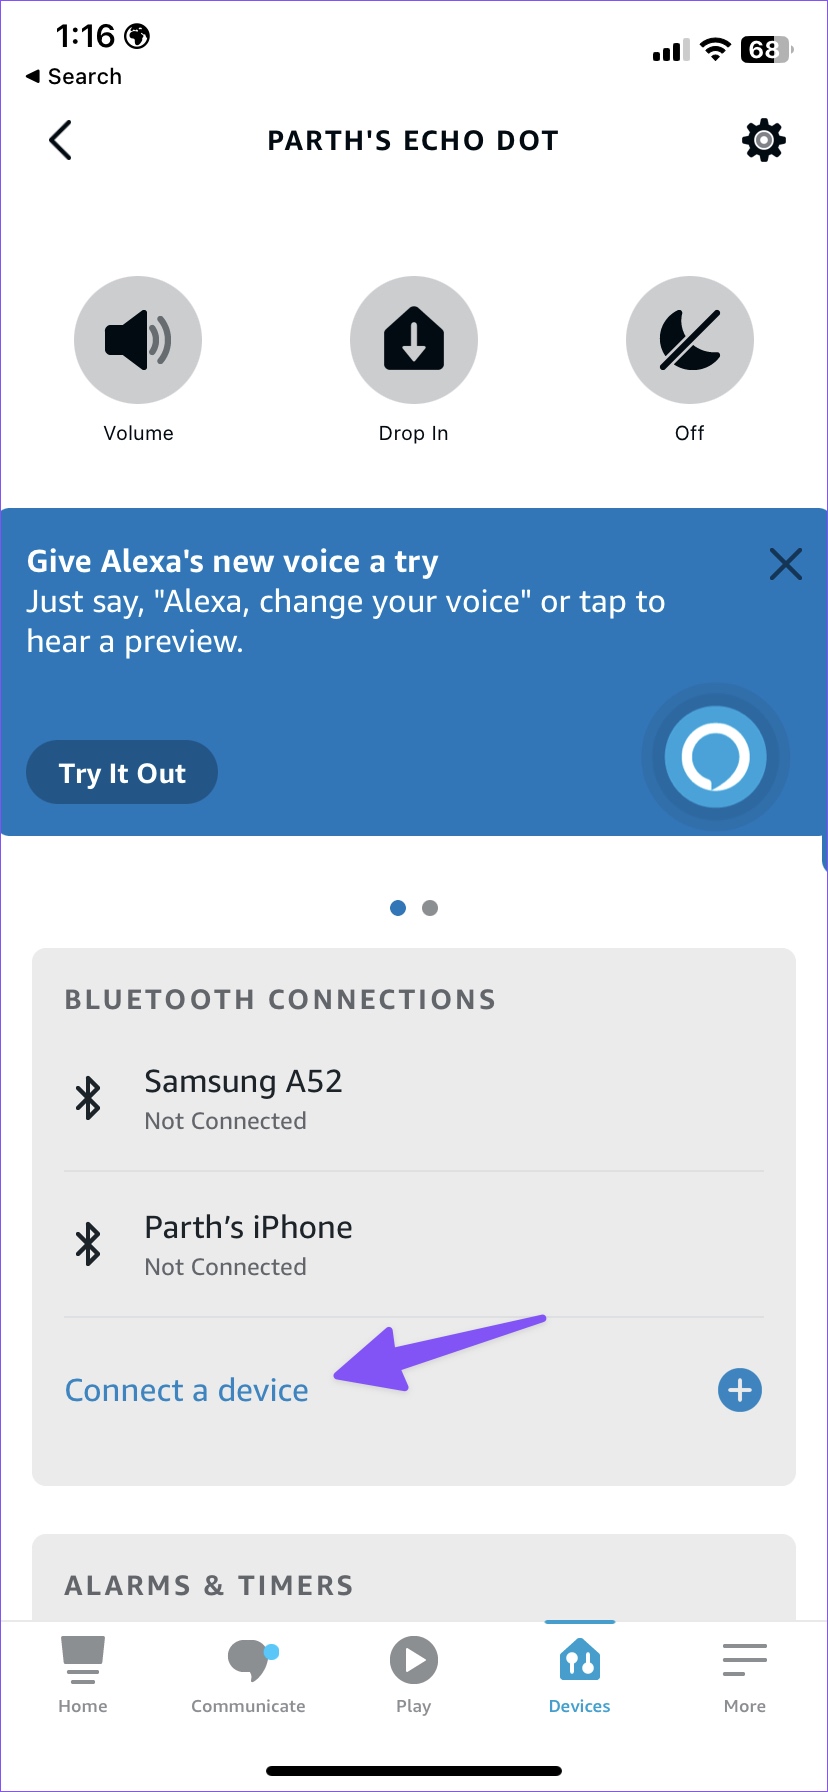 How to Play with Alexa on Amazon - Tech